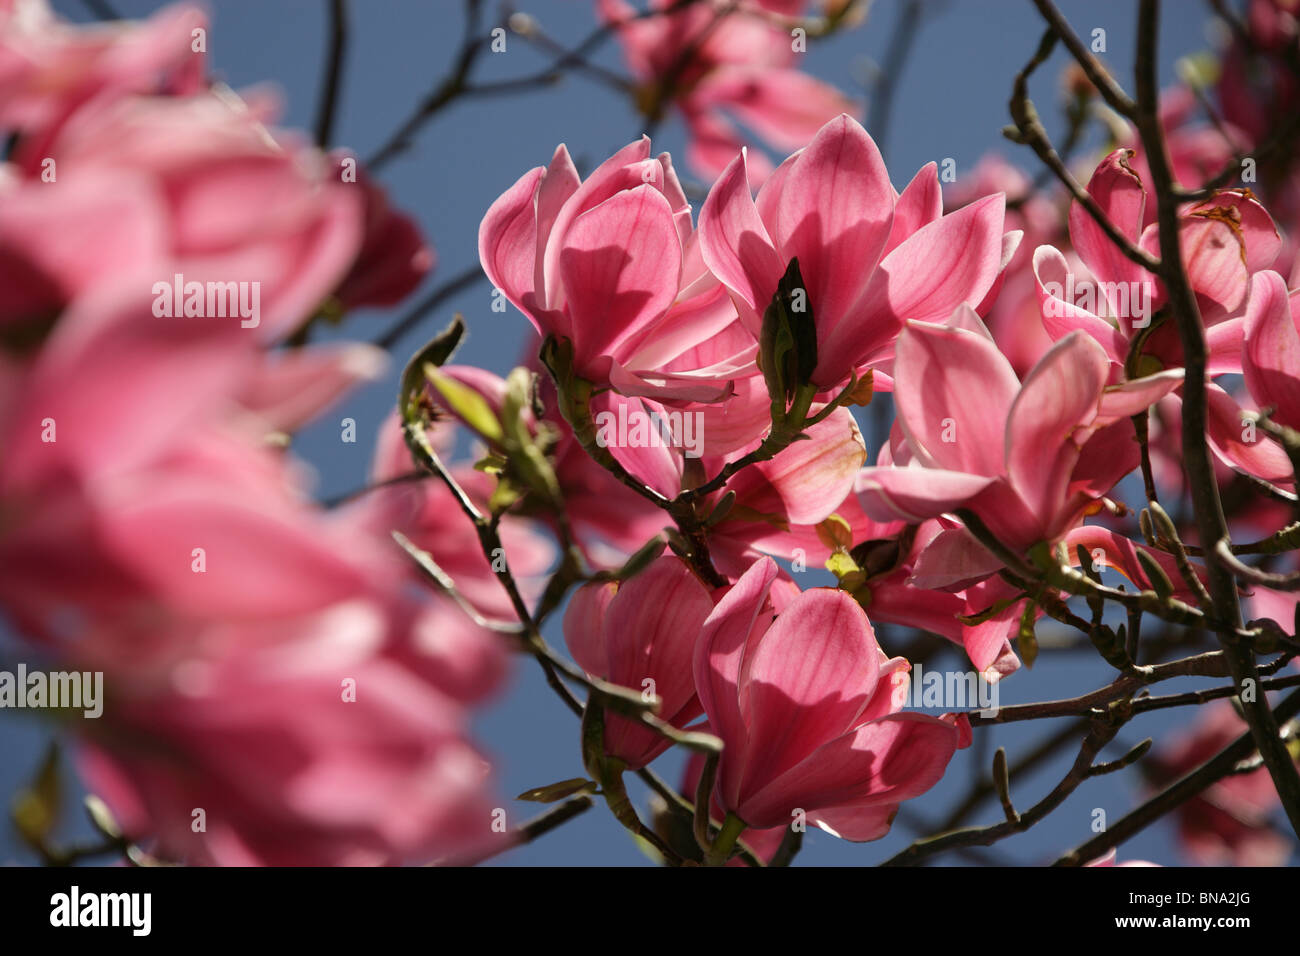 Arley Hall & Gardens, England. Close up spring view of a magnolia sprengeri in full bloom in The Grove woodland garden. Stock Photo